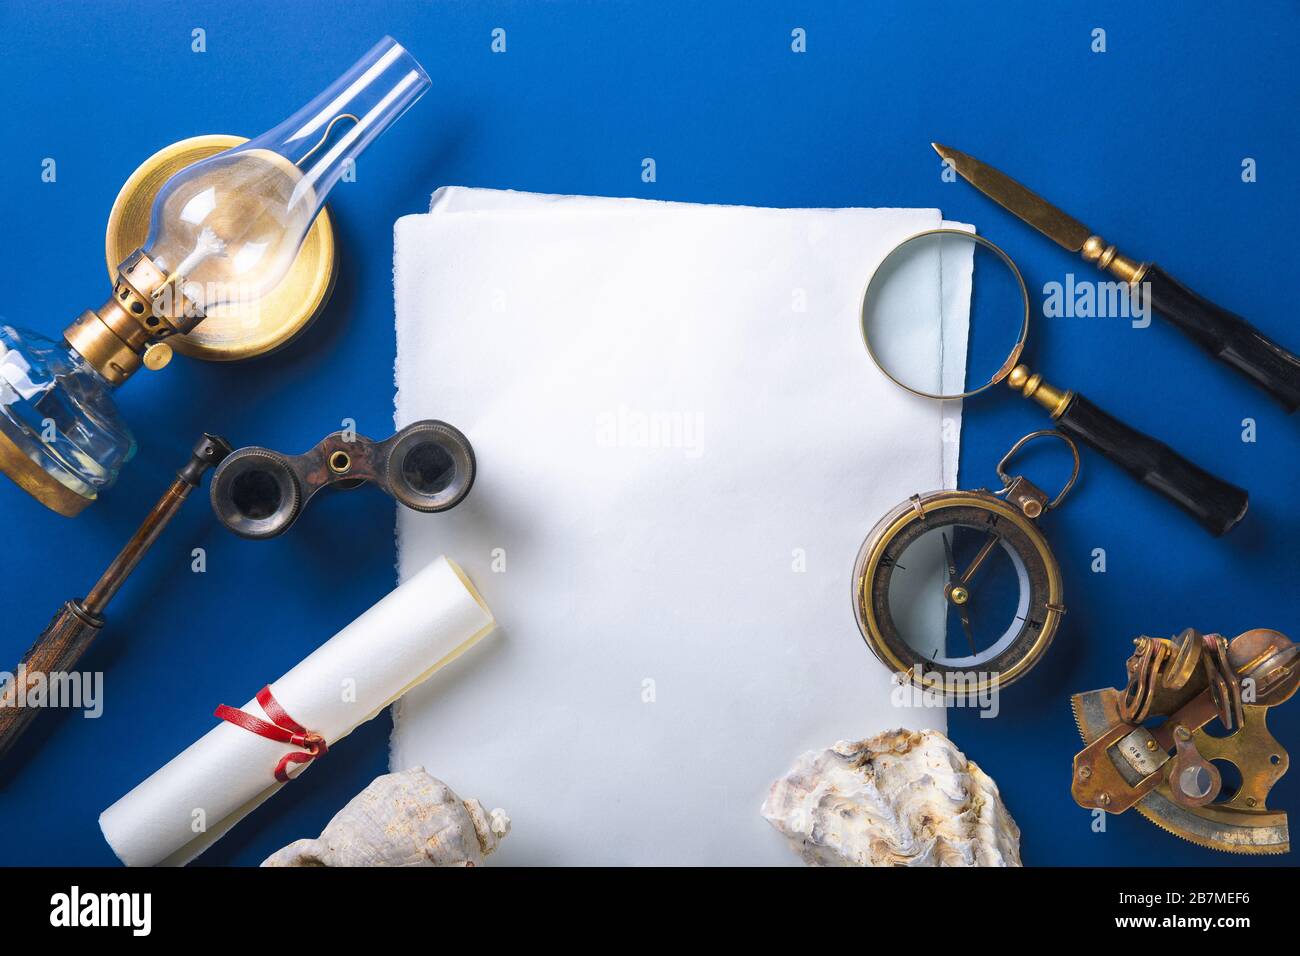 Old fashioned flat lay with retro travel, vacation accessories on blue background. Magnifying glass, compass, sheets, envelope, binoculars. Vintage style, steampunk, gaslight concept. Copyspace. Stock Photo